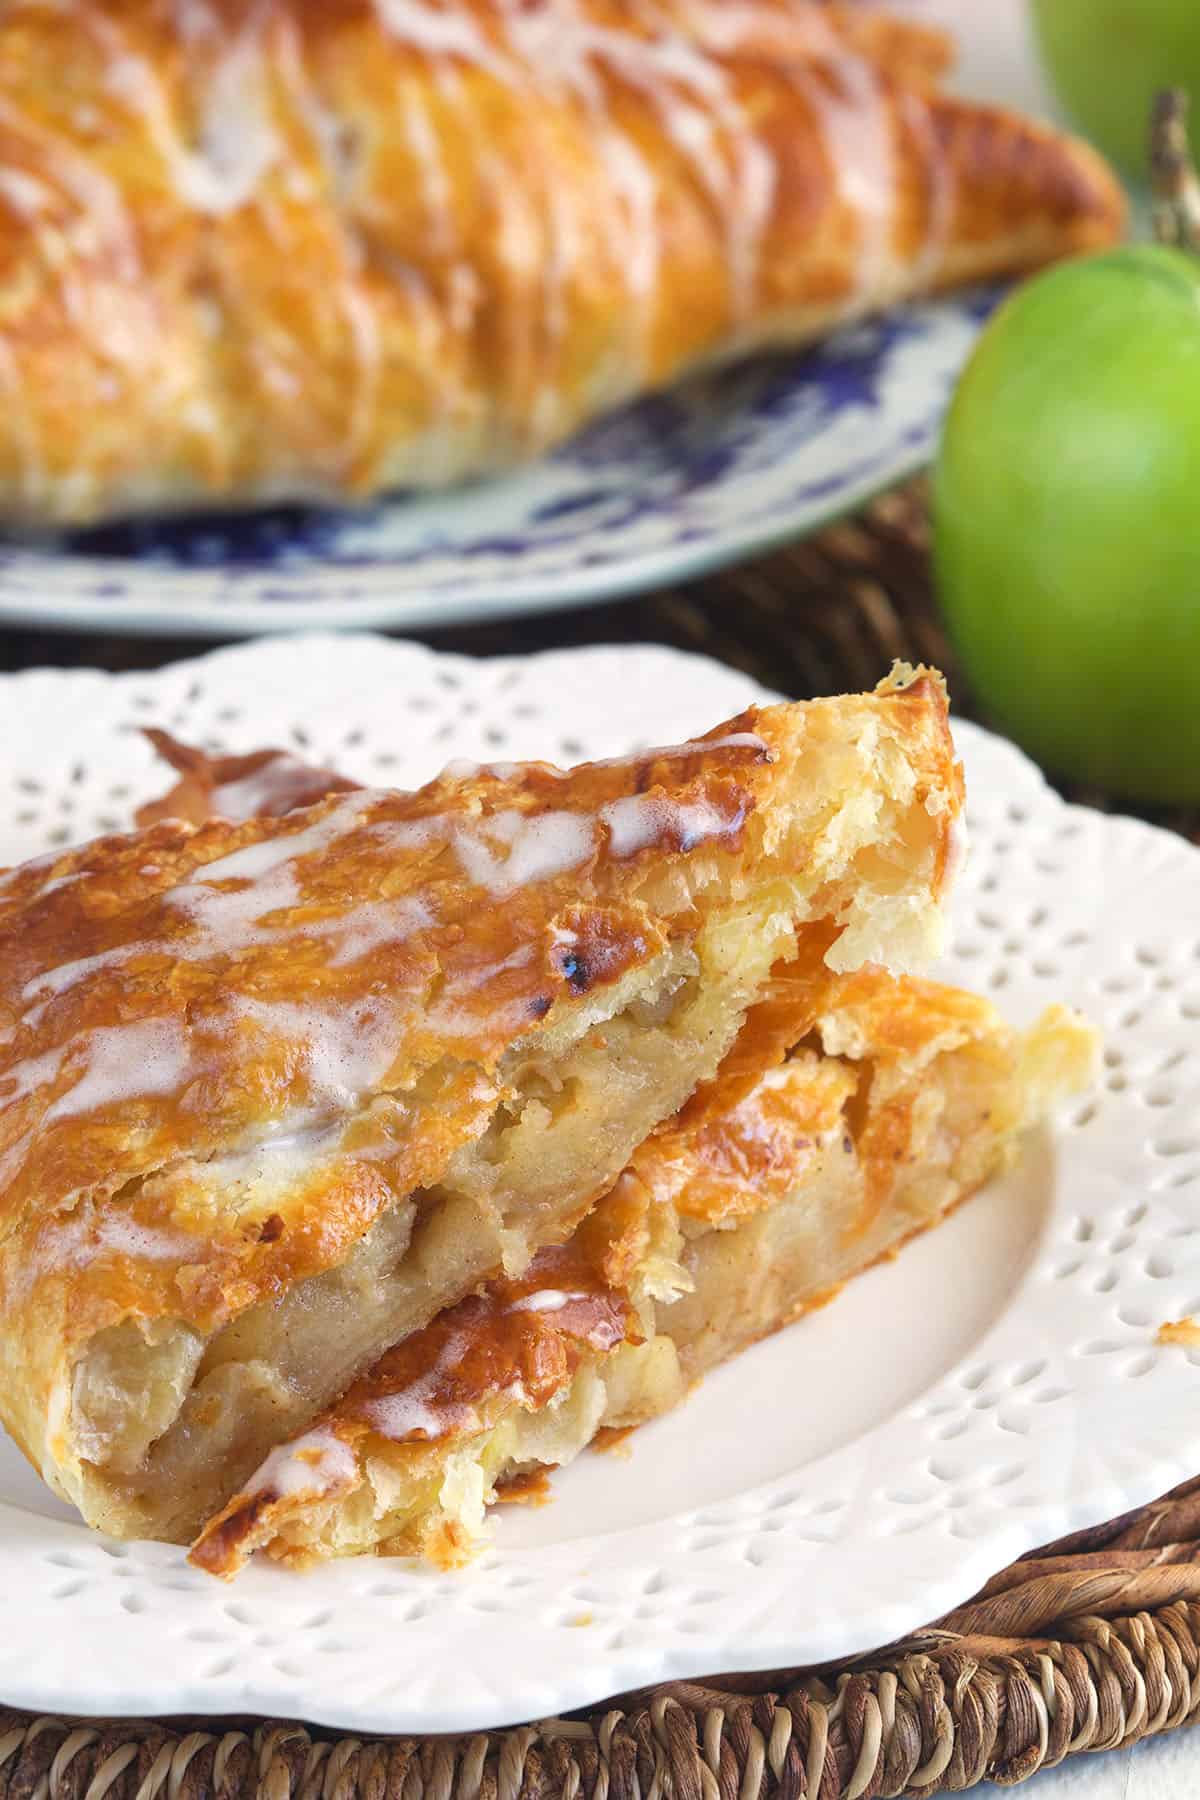 A halved apple turnover is placed on a white plate.